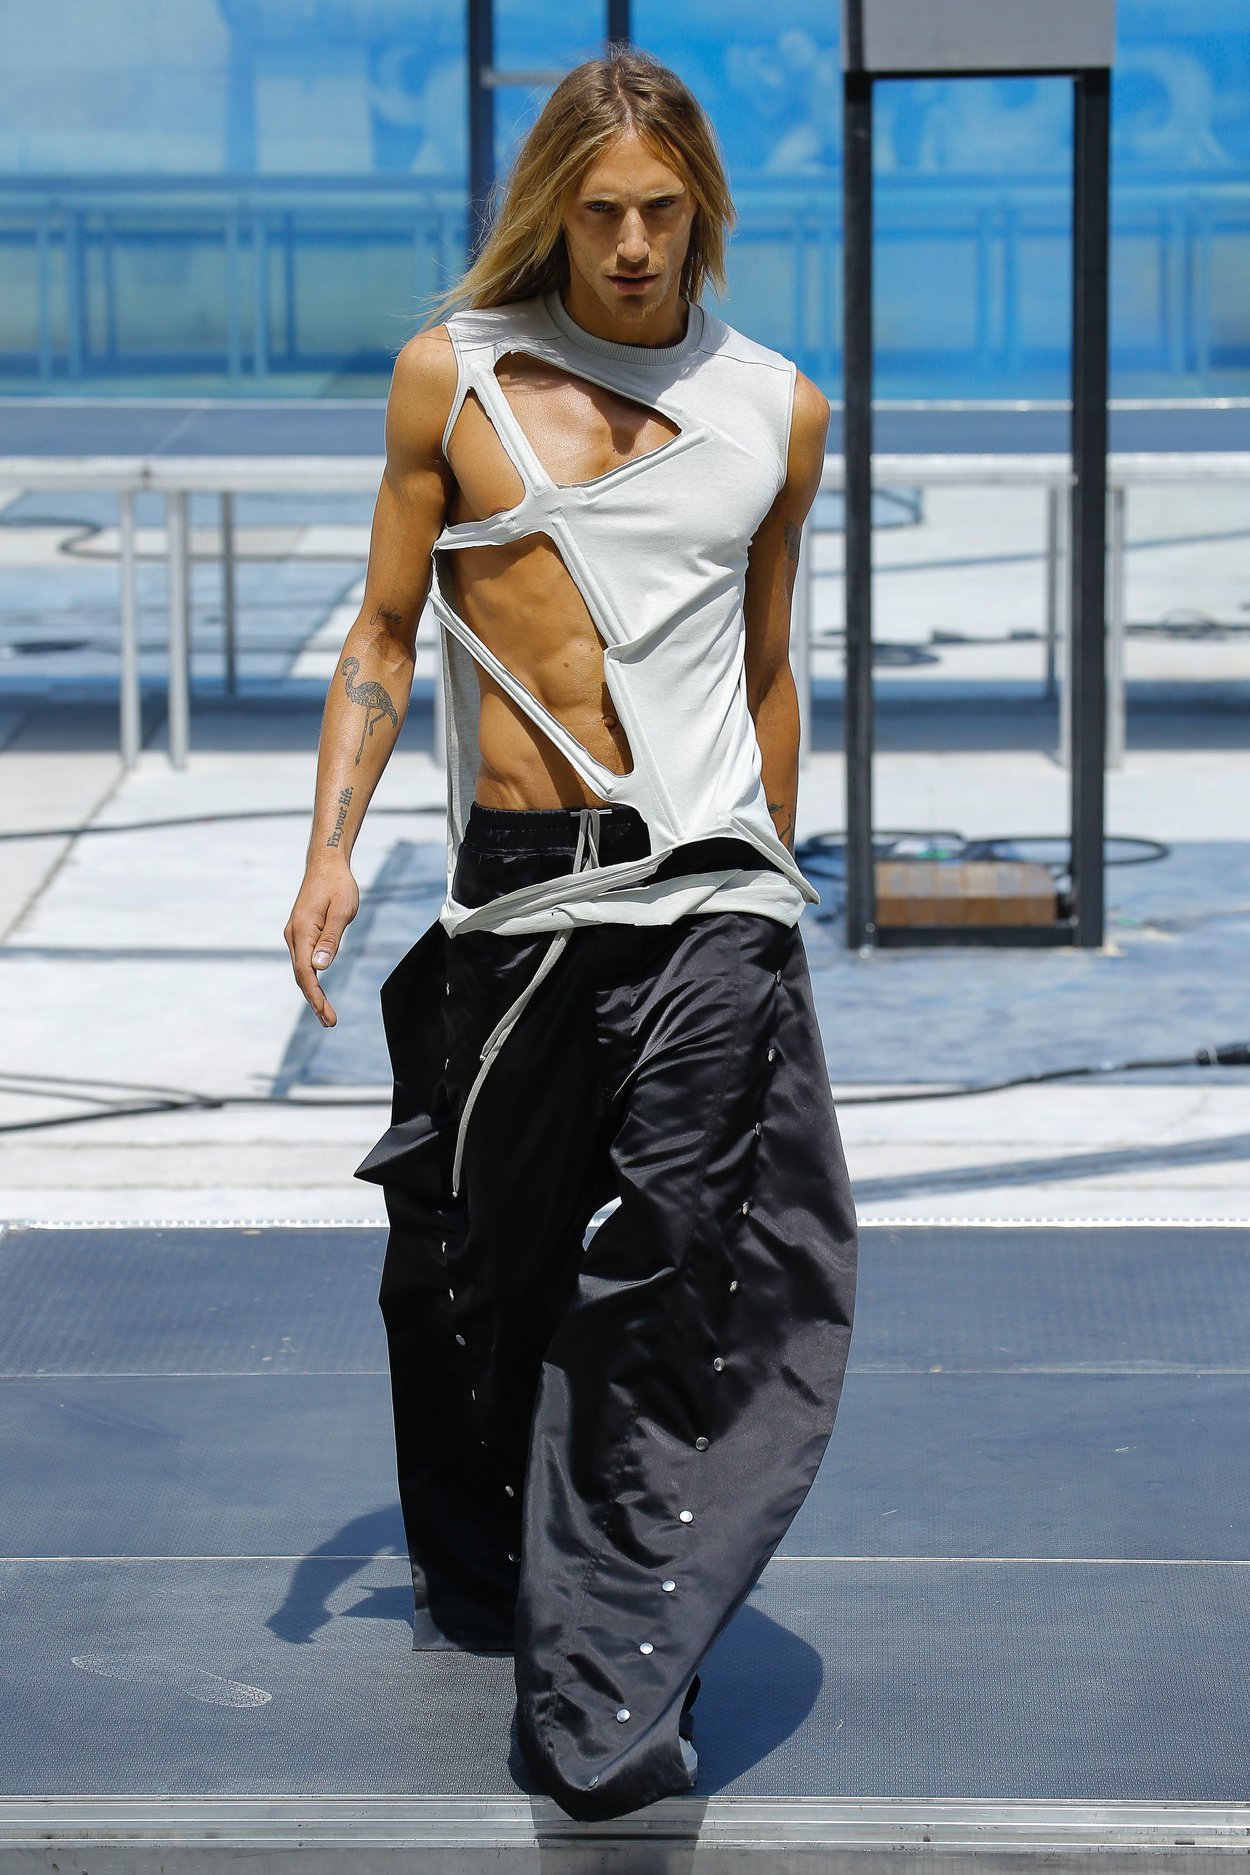 Rick Owens' New Collection is The Most Confusing Thing You'll See Today